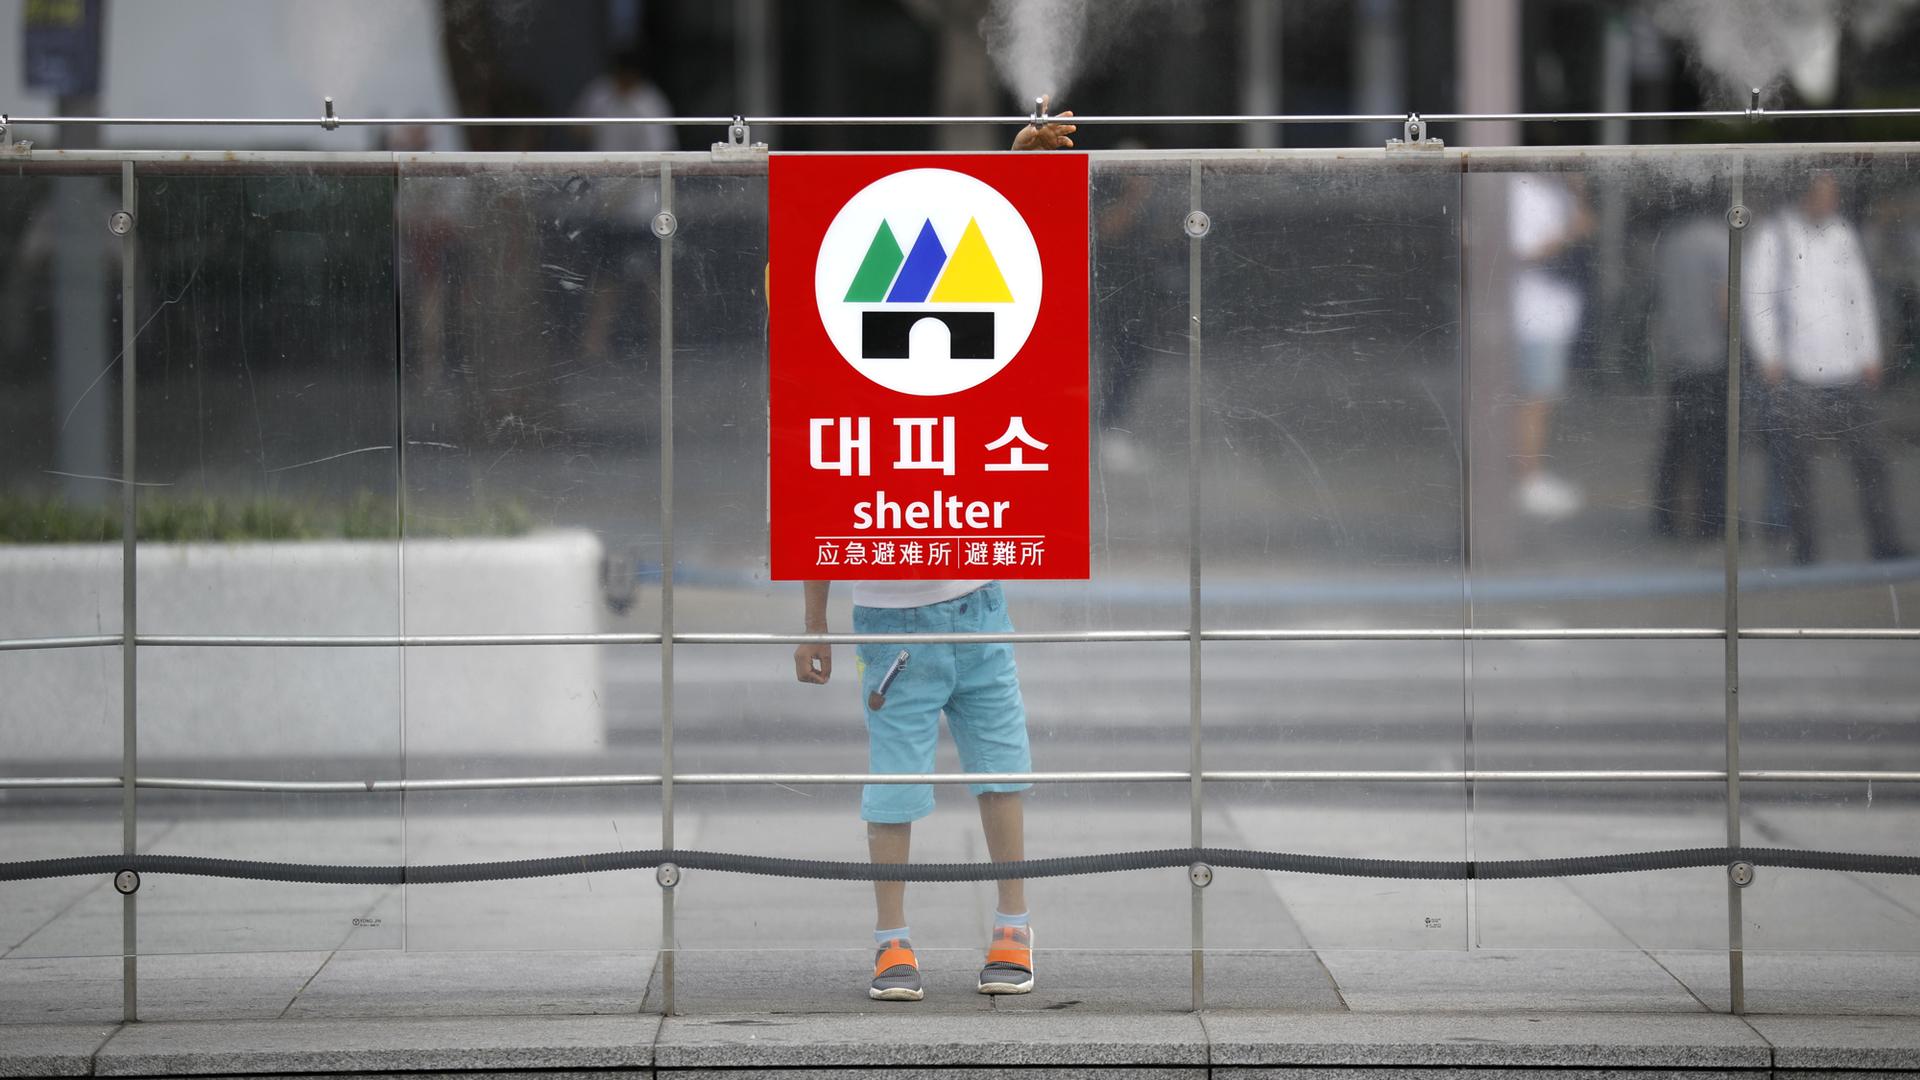 A boy plays behind a sign of shelter at an entrance of a subway station in Seoul, South Korea, August 11, 2017.